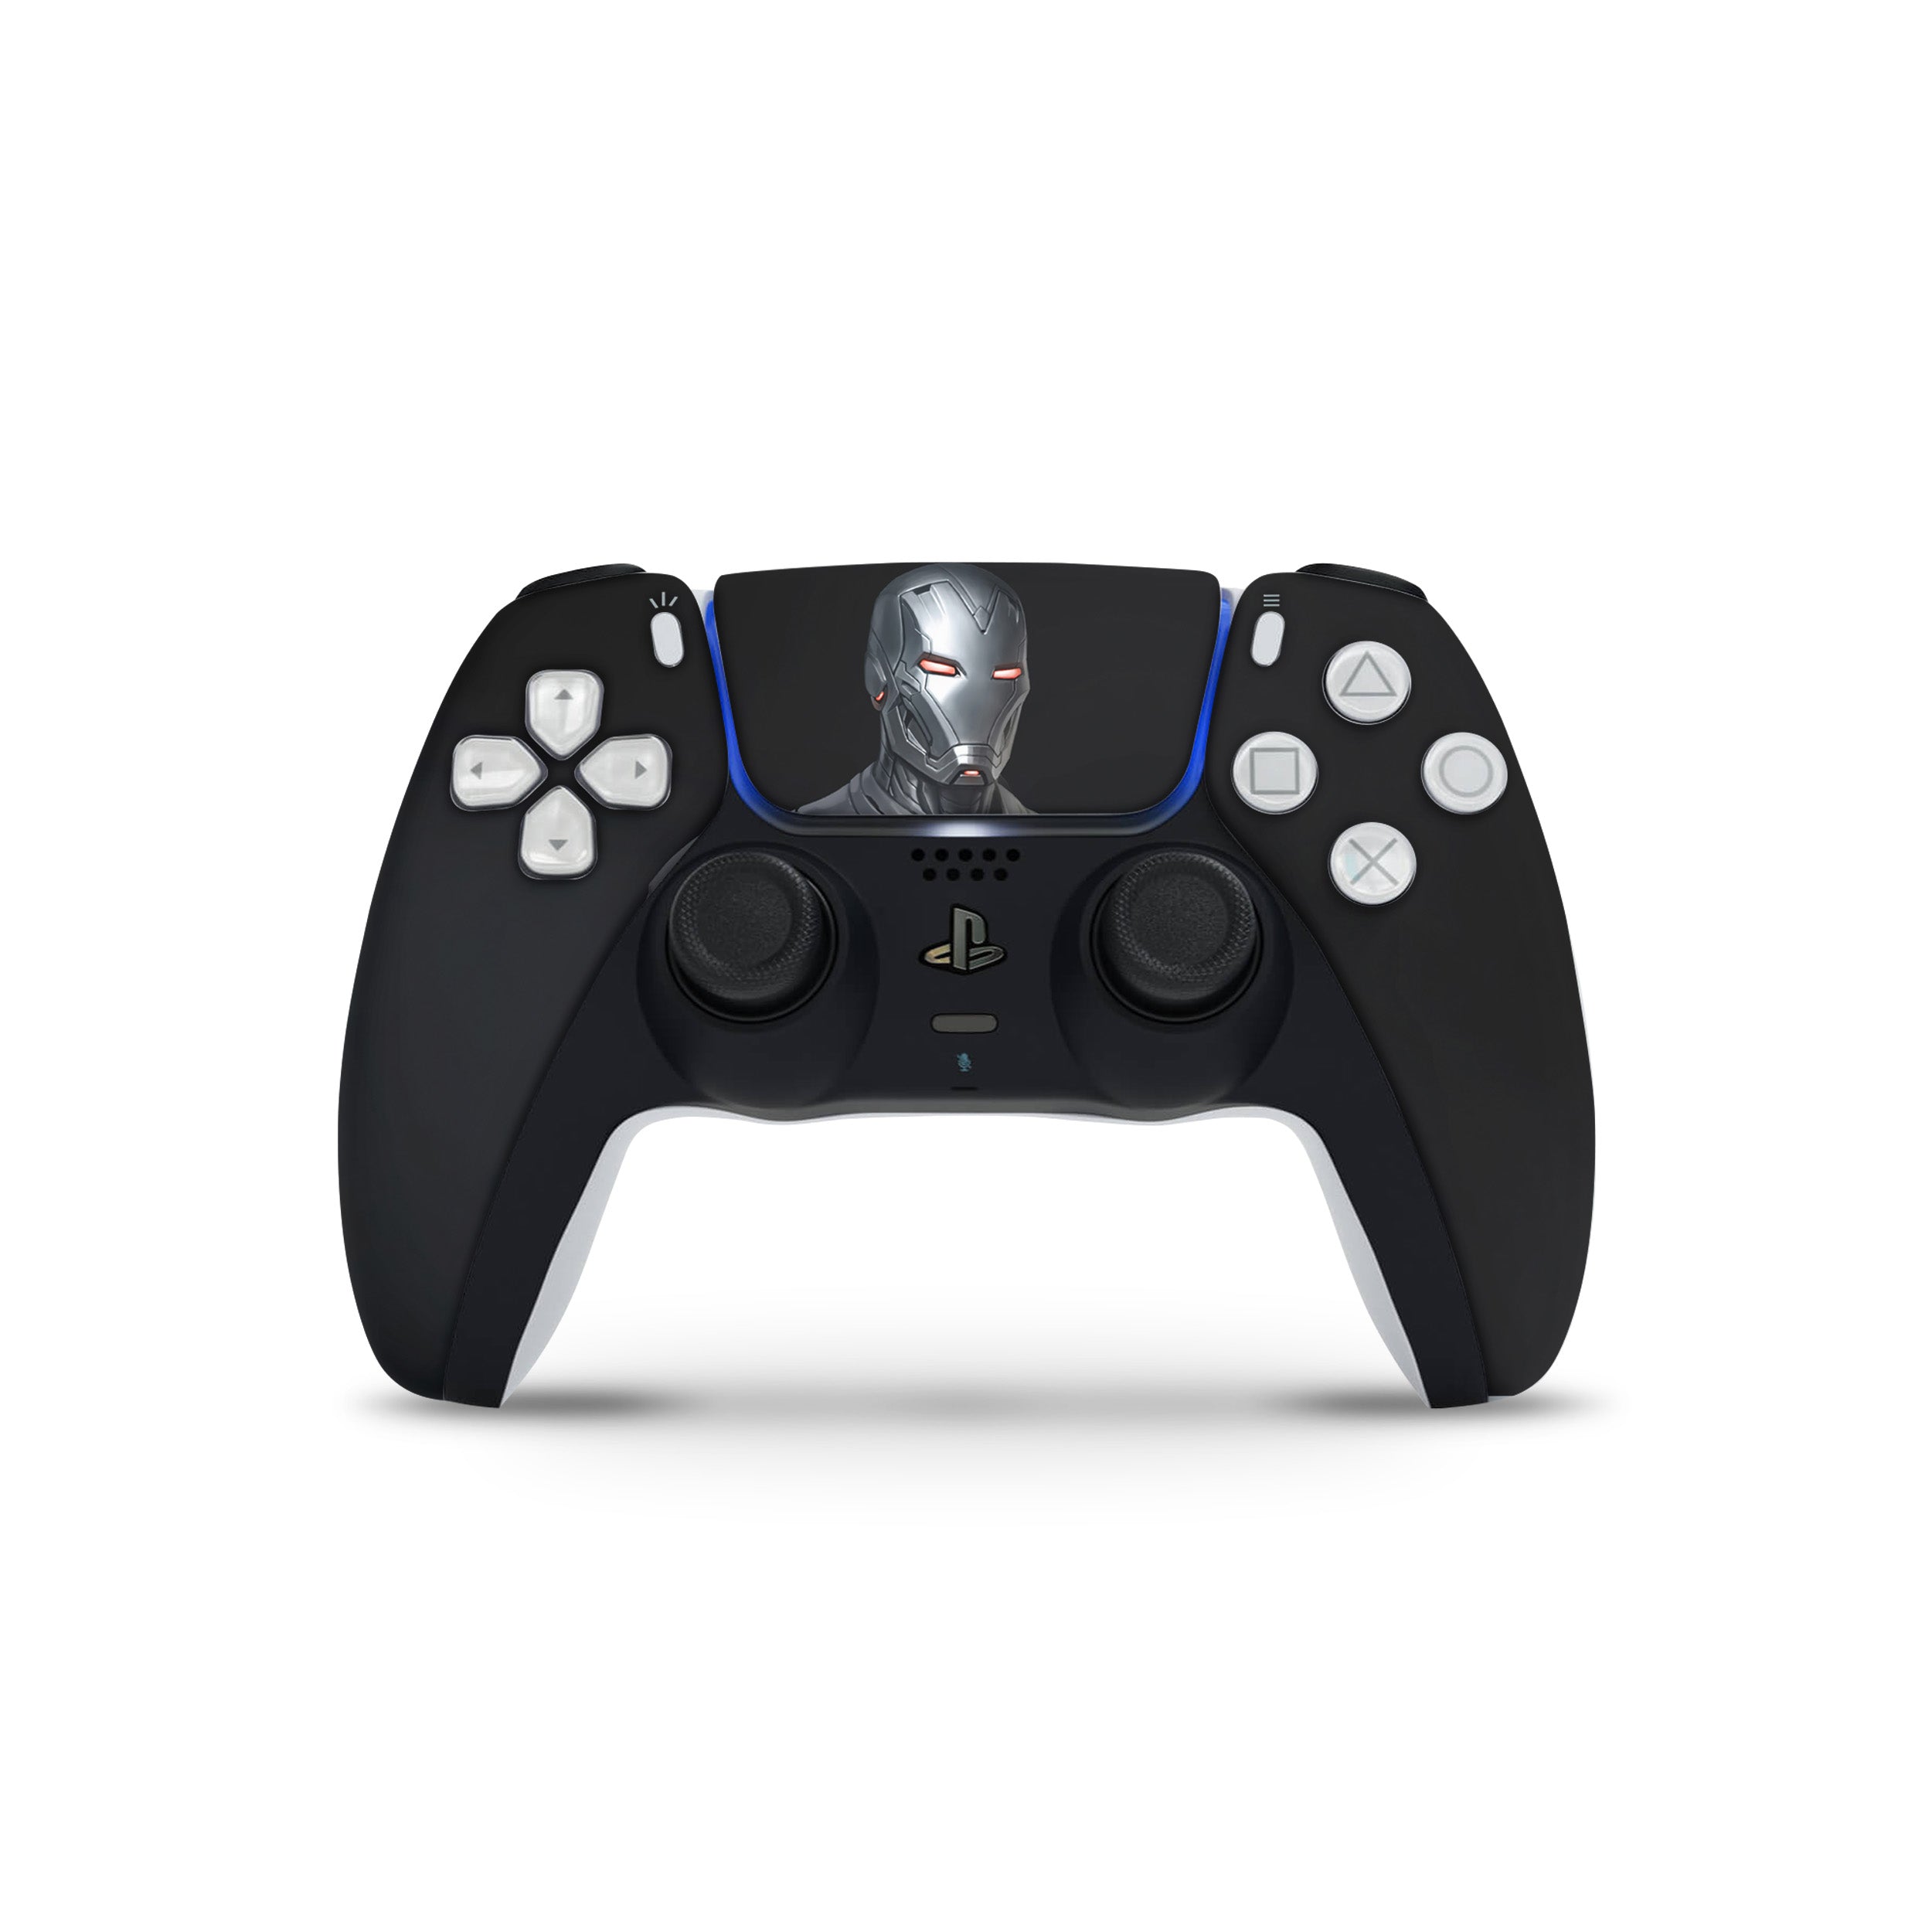 A video game skin featuring a Marvel Comics Iron Man design for the PS5 DualSense Controller.